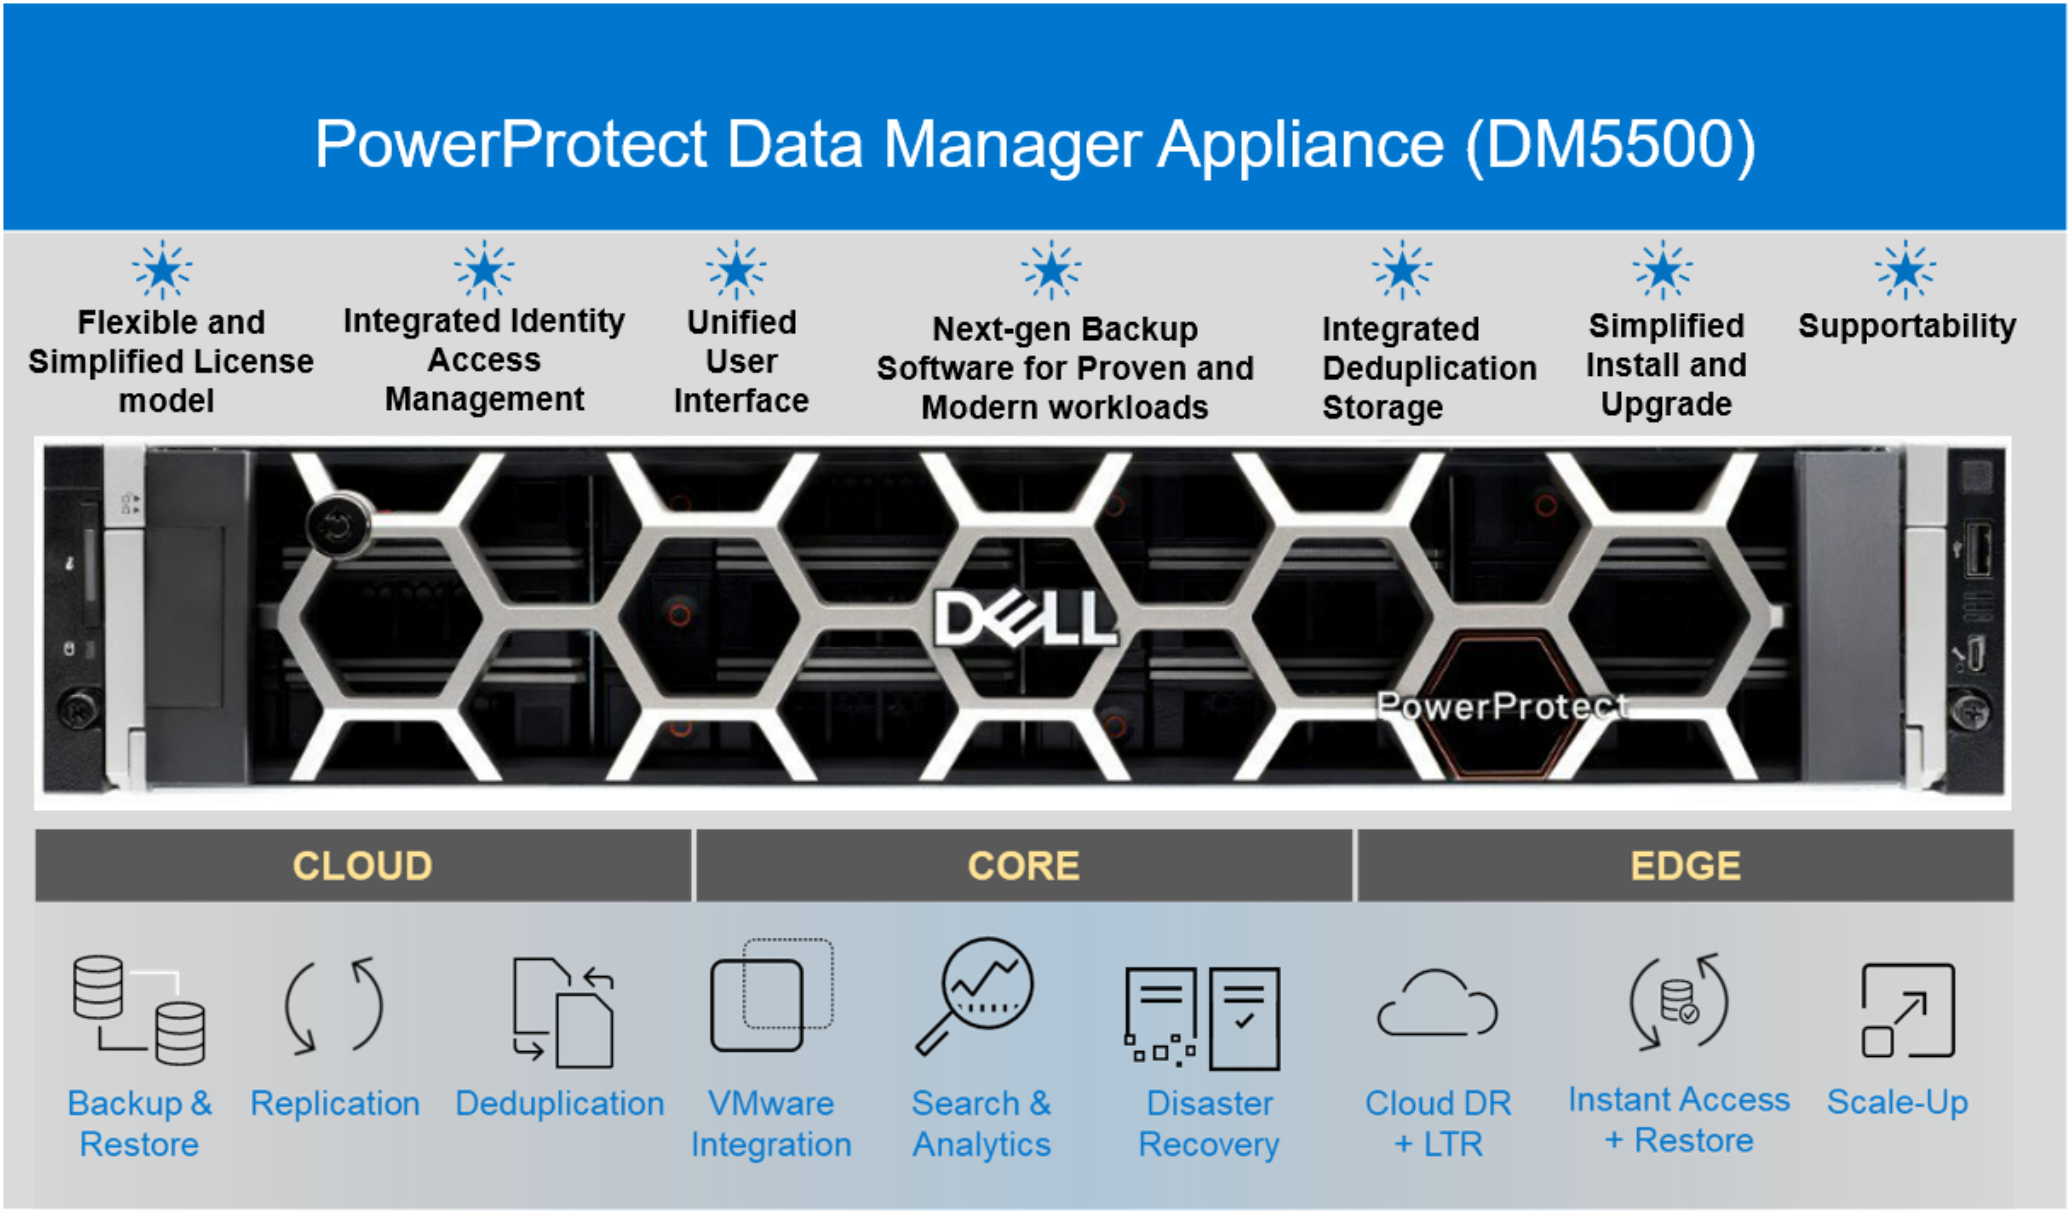 The image shows the Data Manager appliance features.